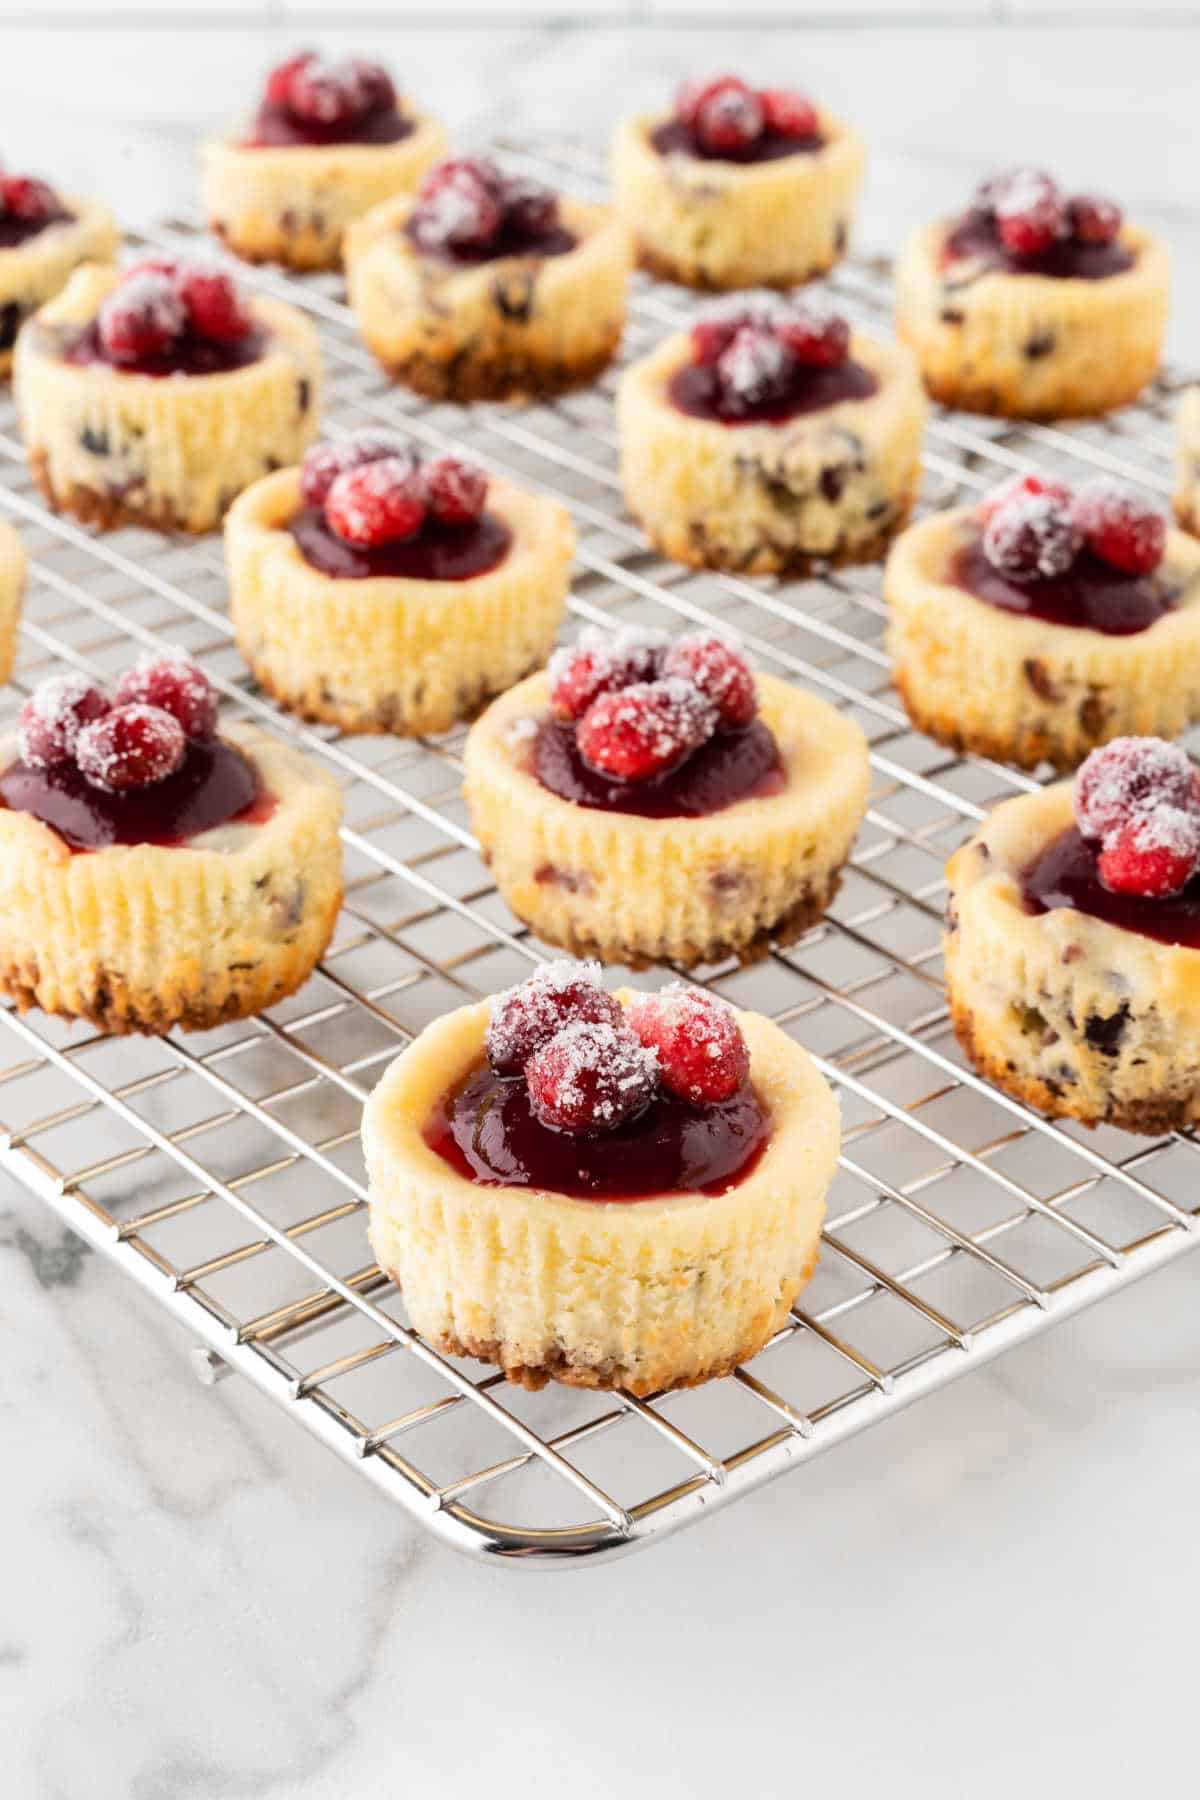 Cranberry White Chocolate Cheesecakes on a wire rack.